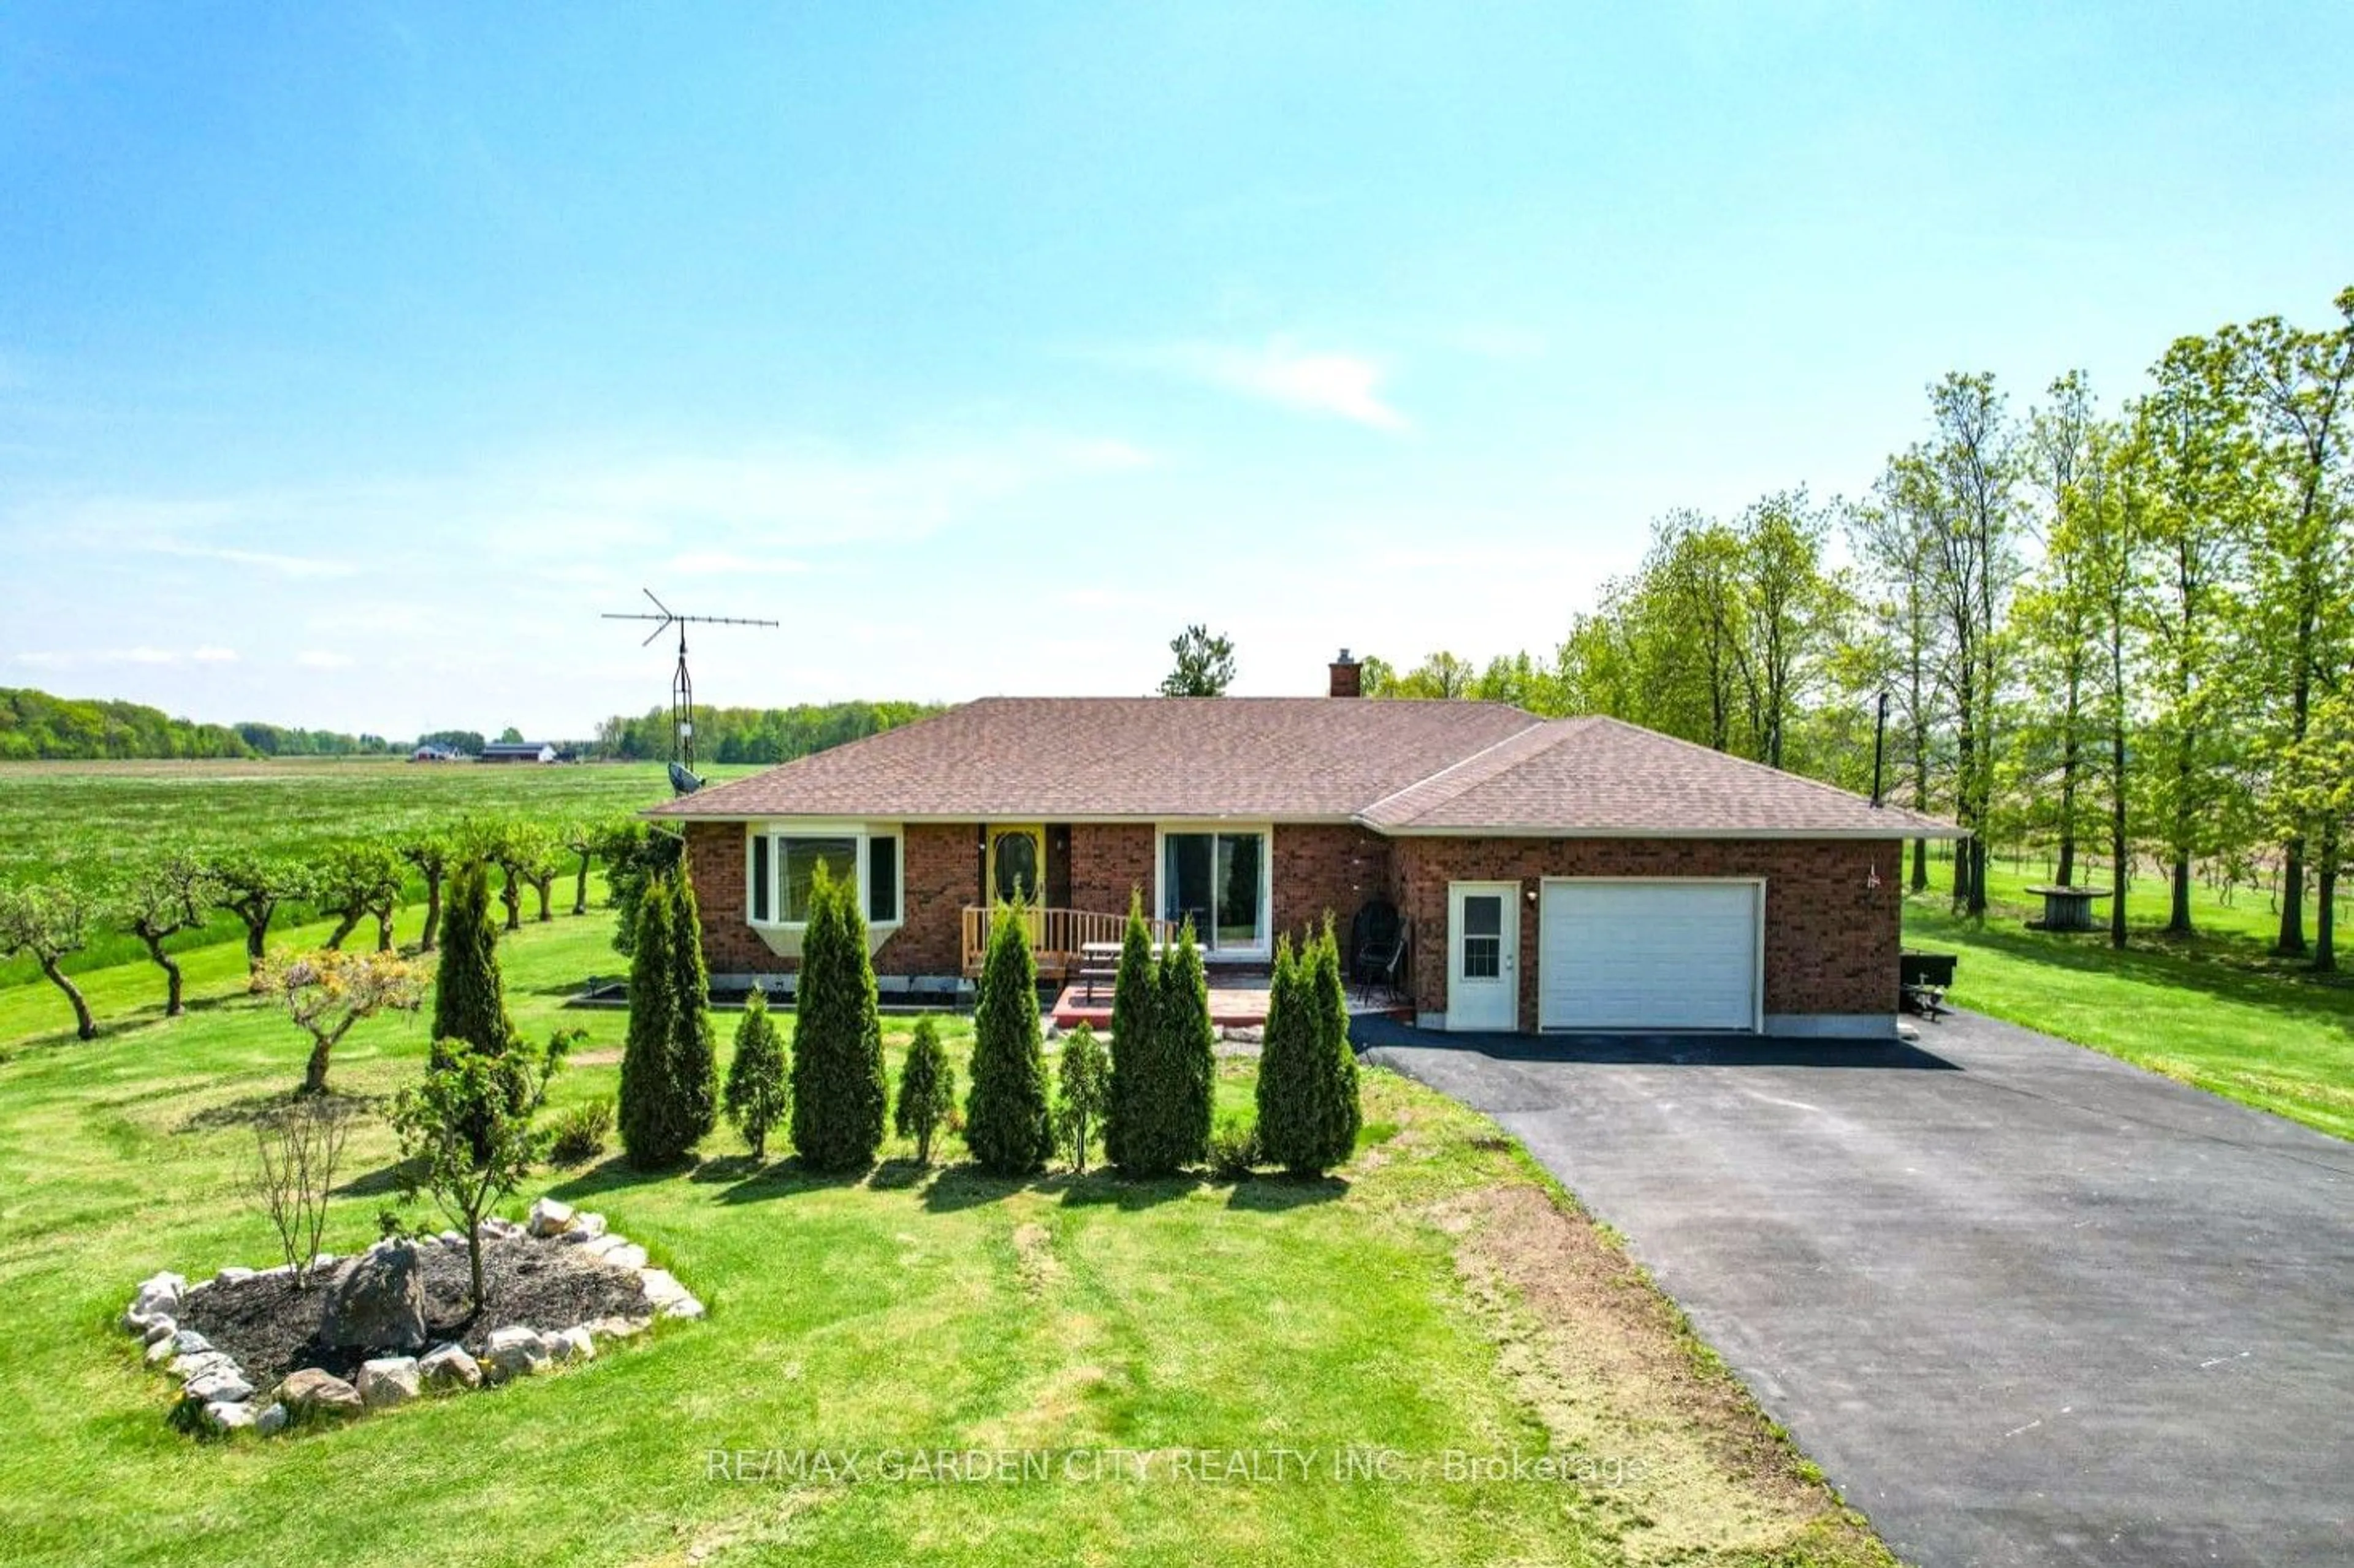 Home with brick exterior material for 5282 Spring Creek Rd, Lincoln Ontario L0R 2A0